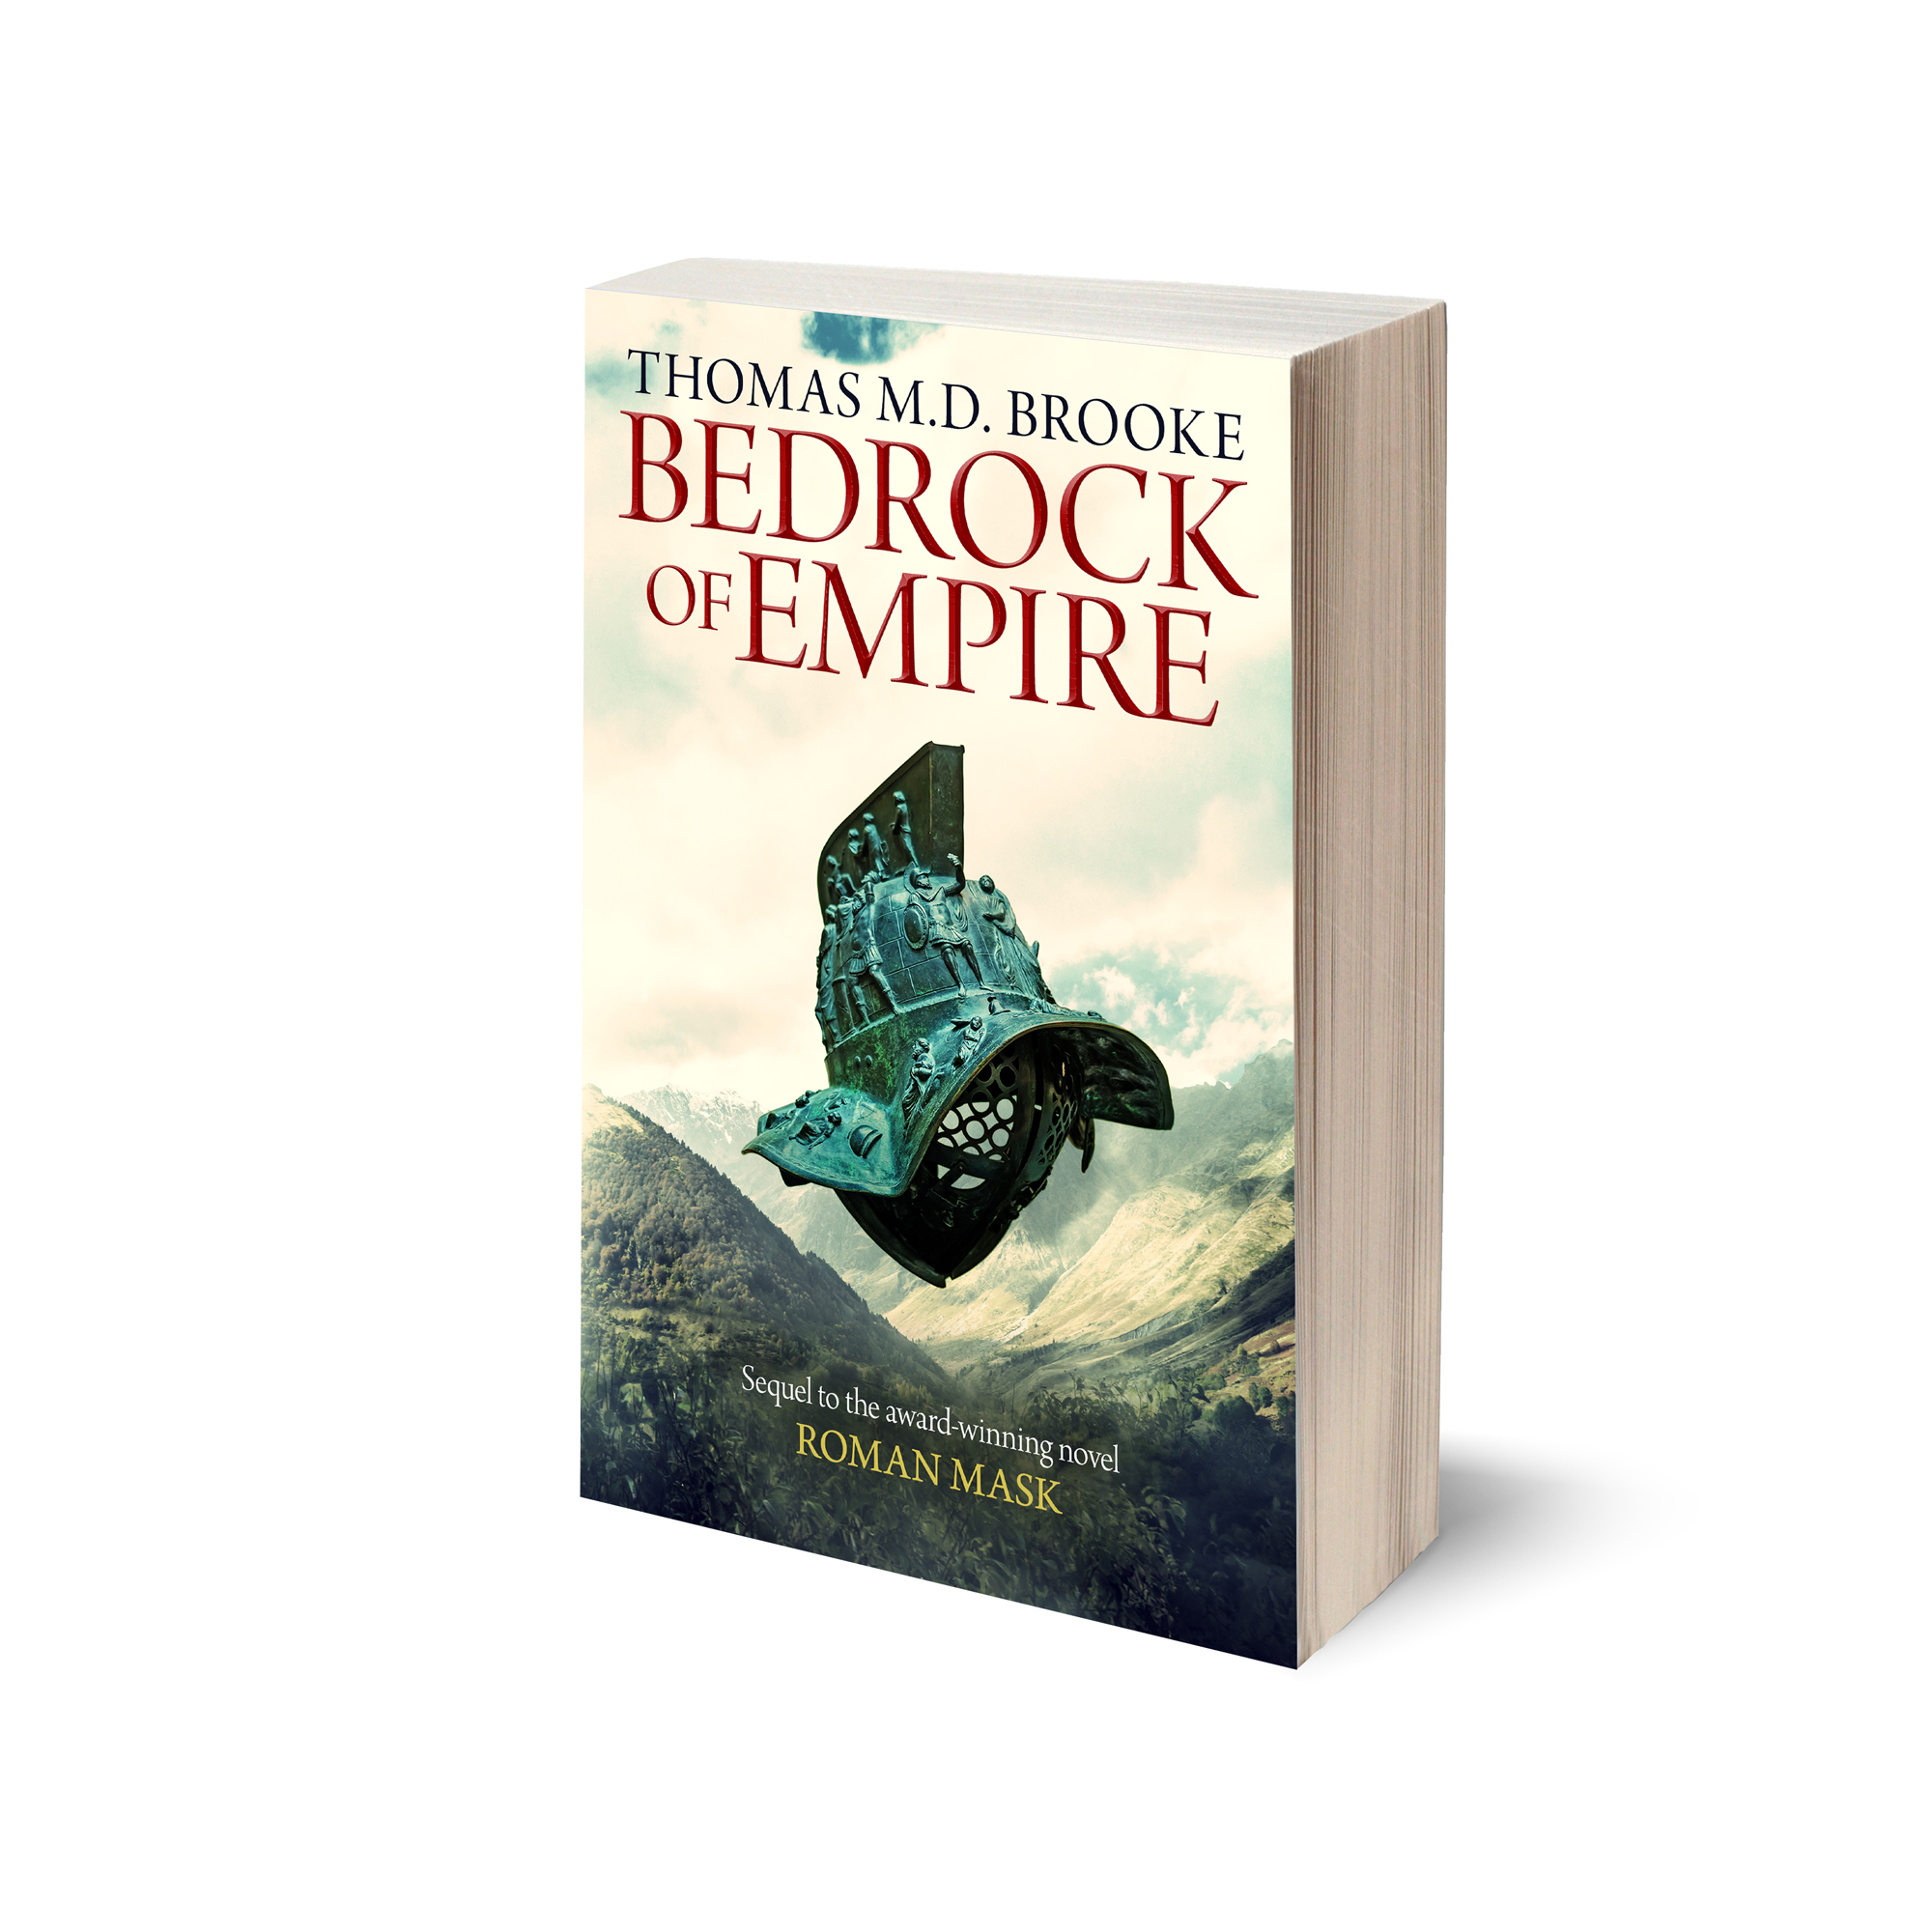 Out today!! BEDROCK OF EMPIRE Sequel to the award winning and highly
acclaimed novel ROMAN MASK by Thomas M.D. Brooke